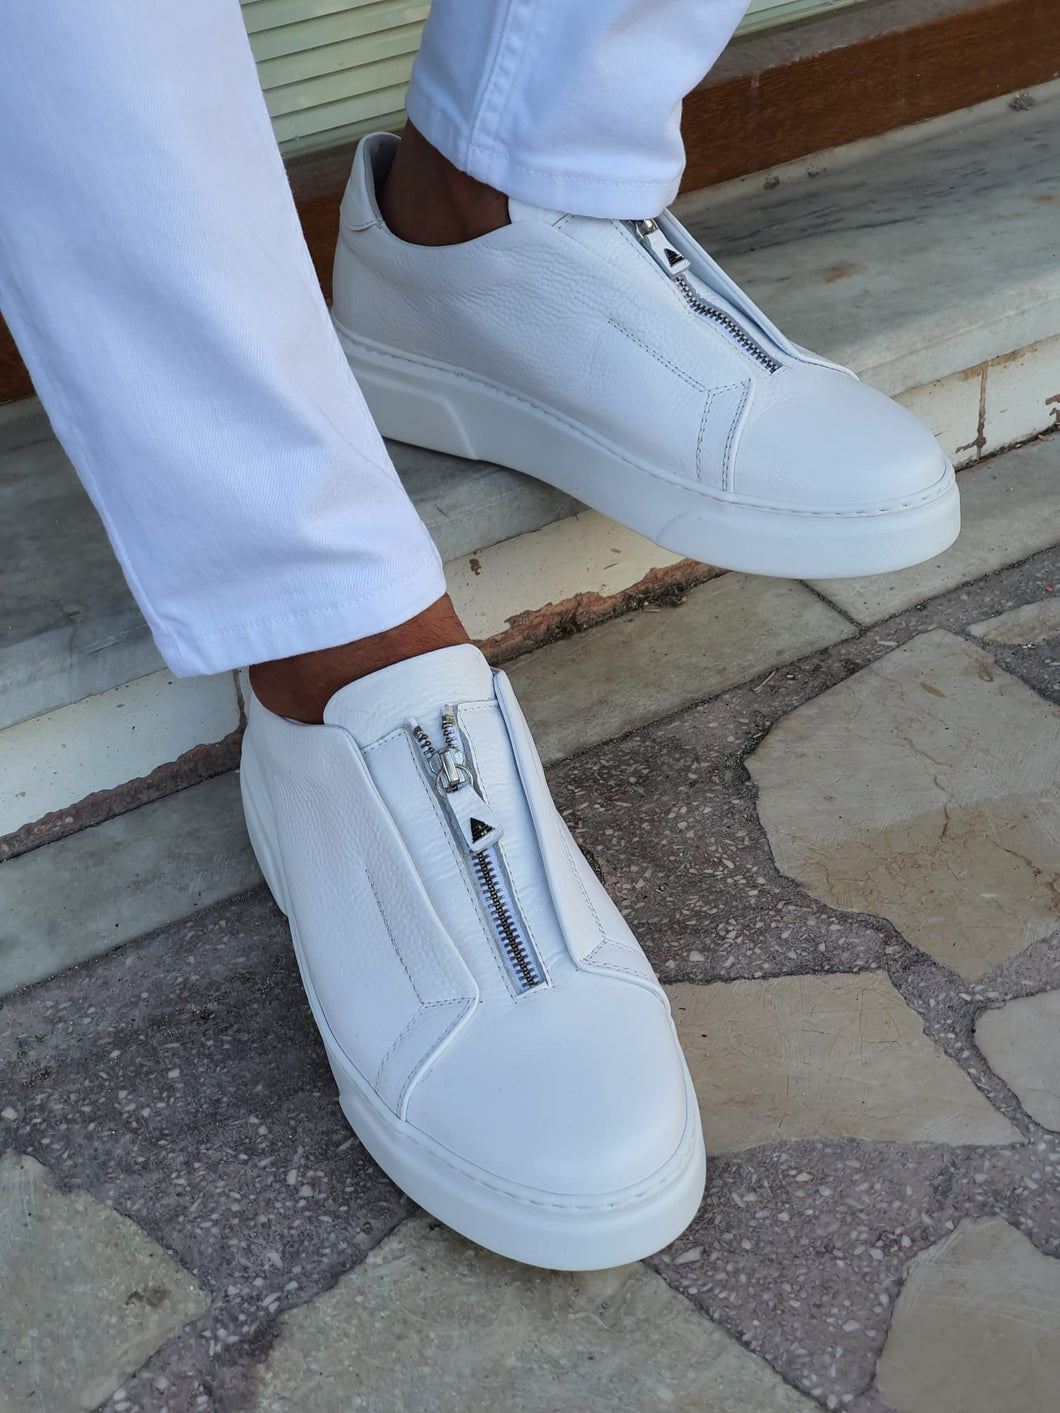 Lucas Special Edition Eva Sole White Zippered Leather Sneakers